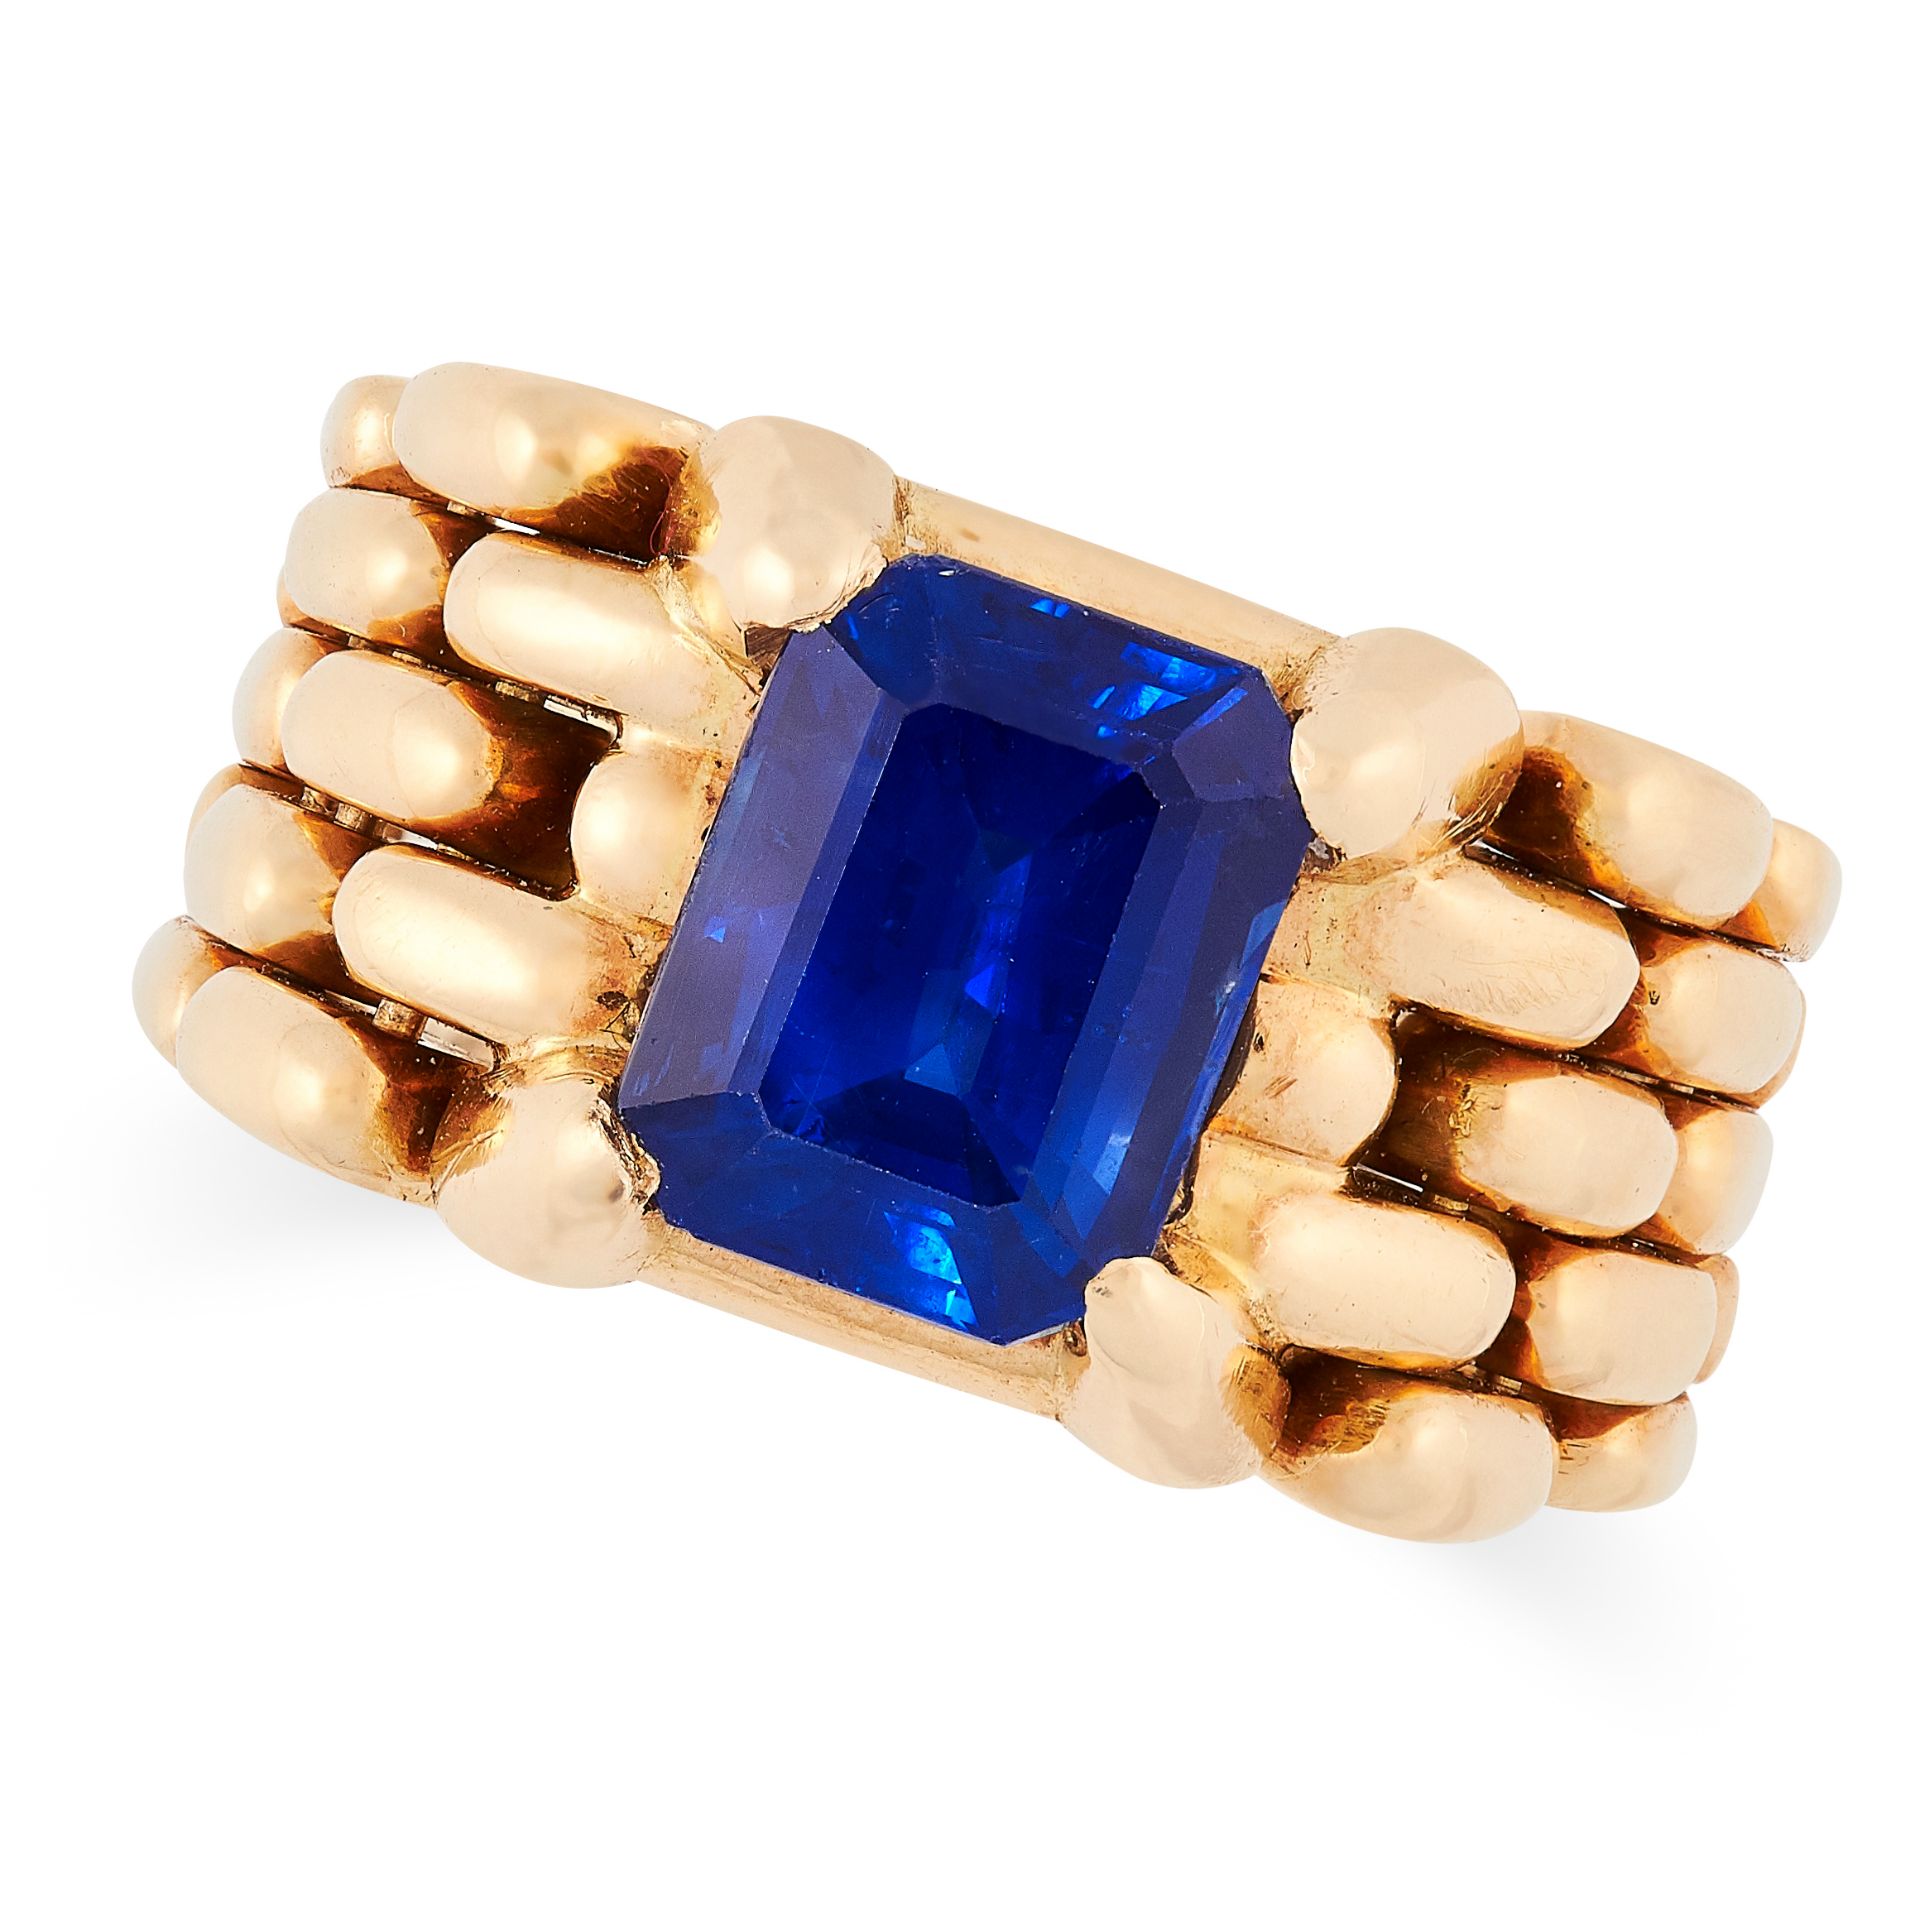 A VINTAGE SAPPHIRE RING comprising of an emerald cut sapphire of 4.70 carats in an articulated